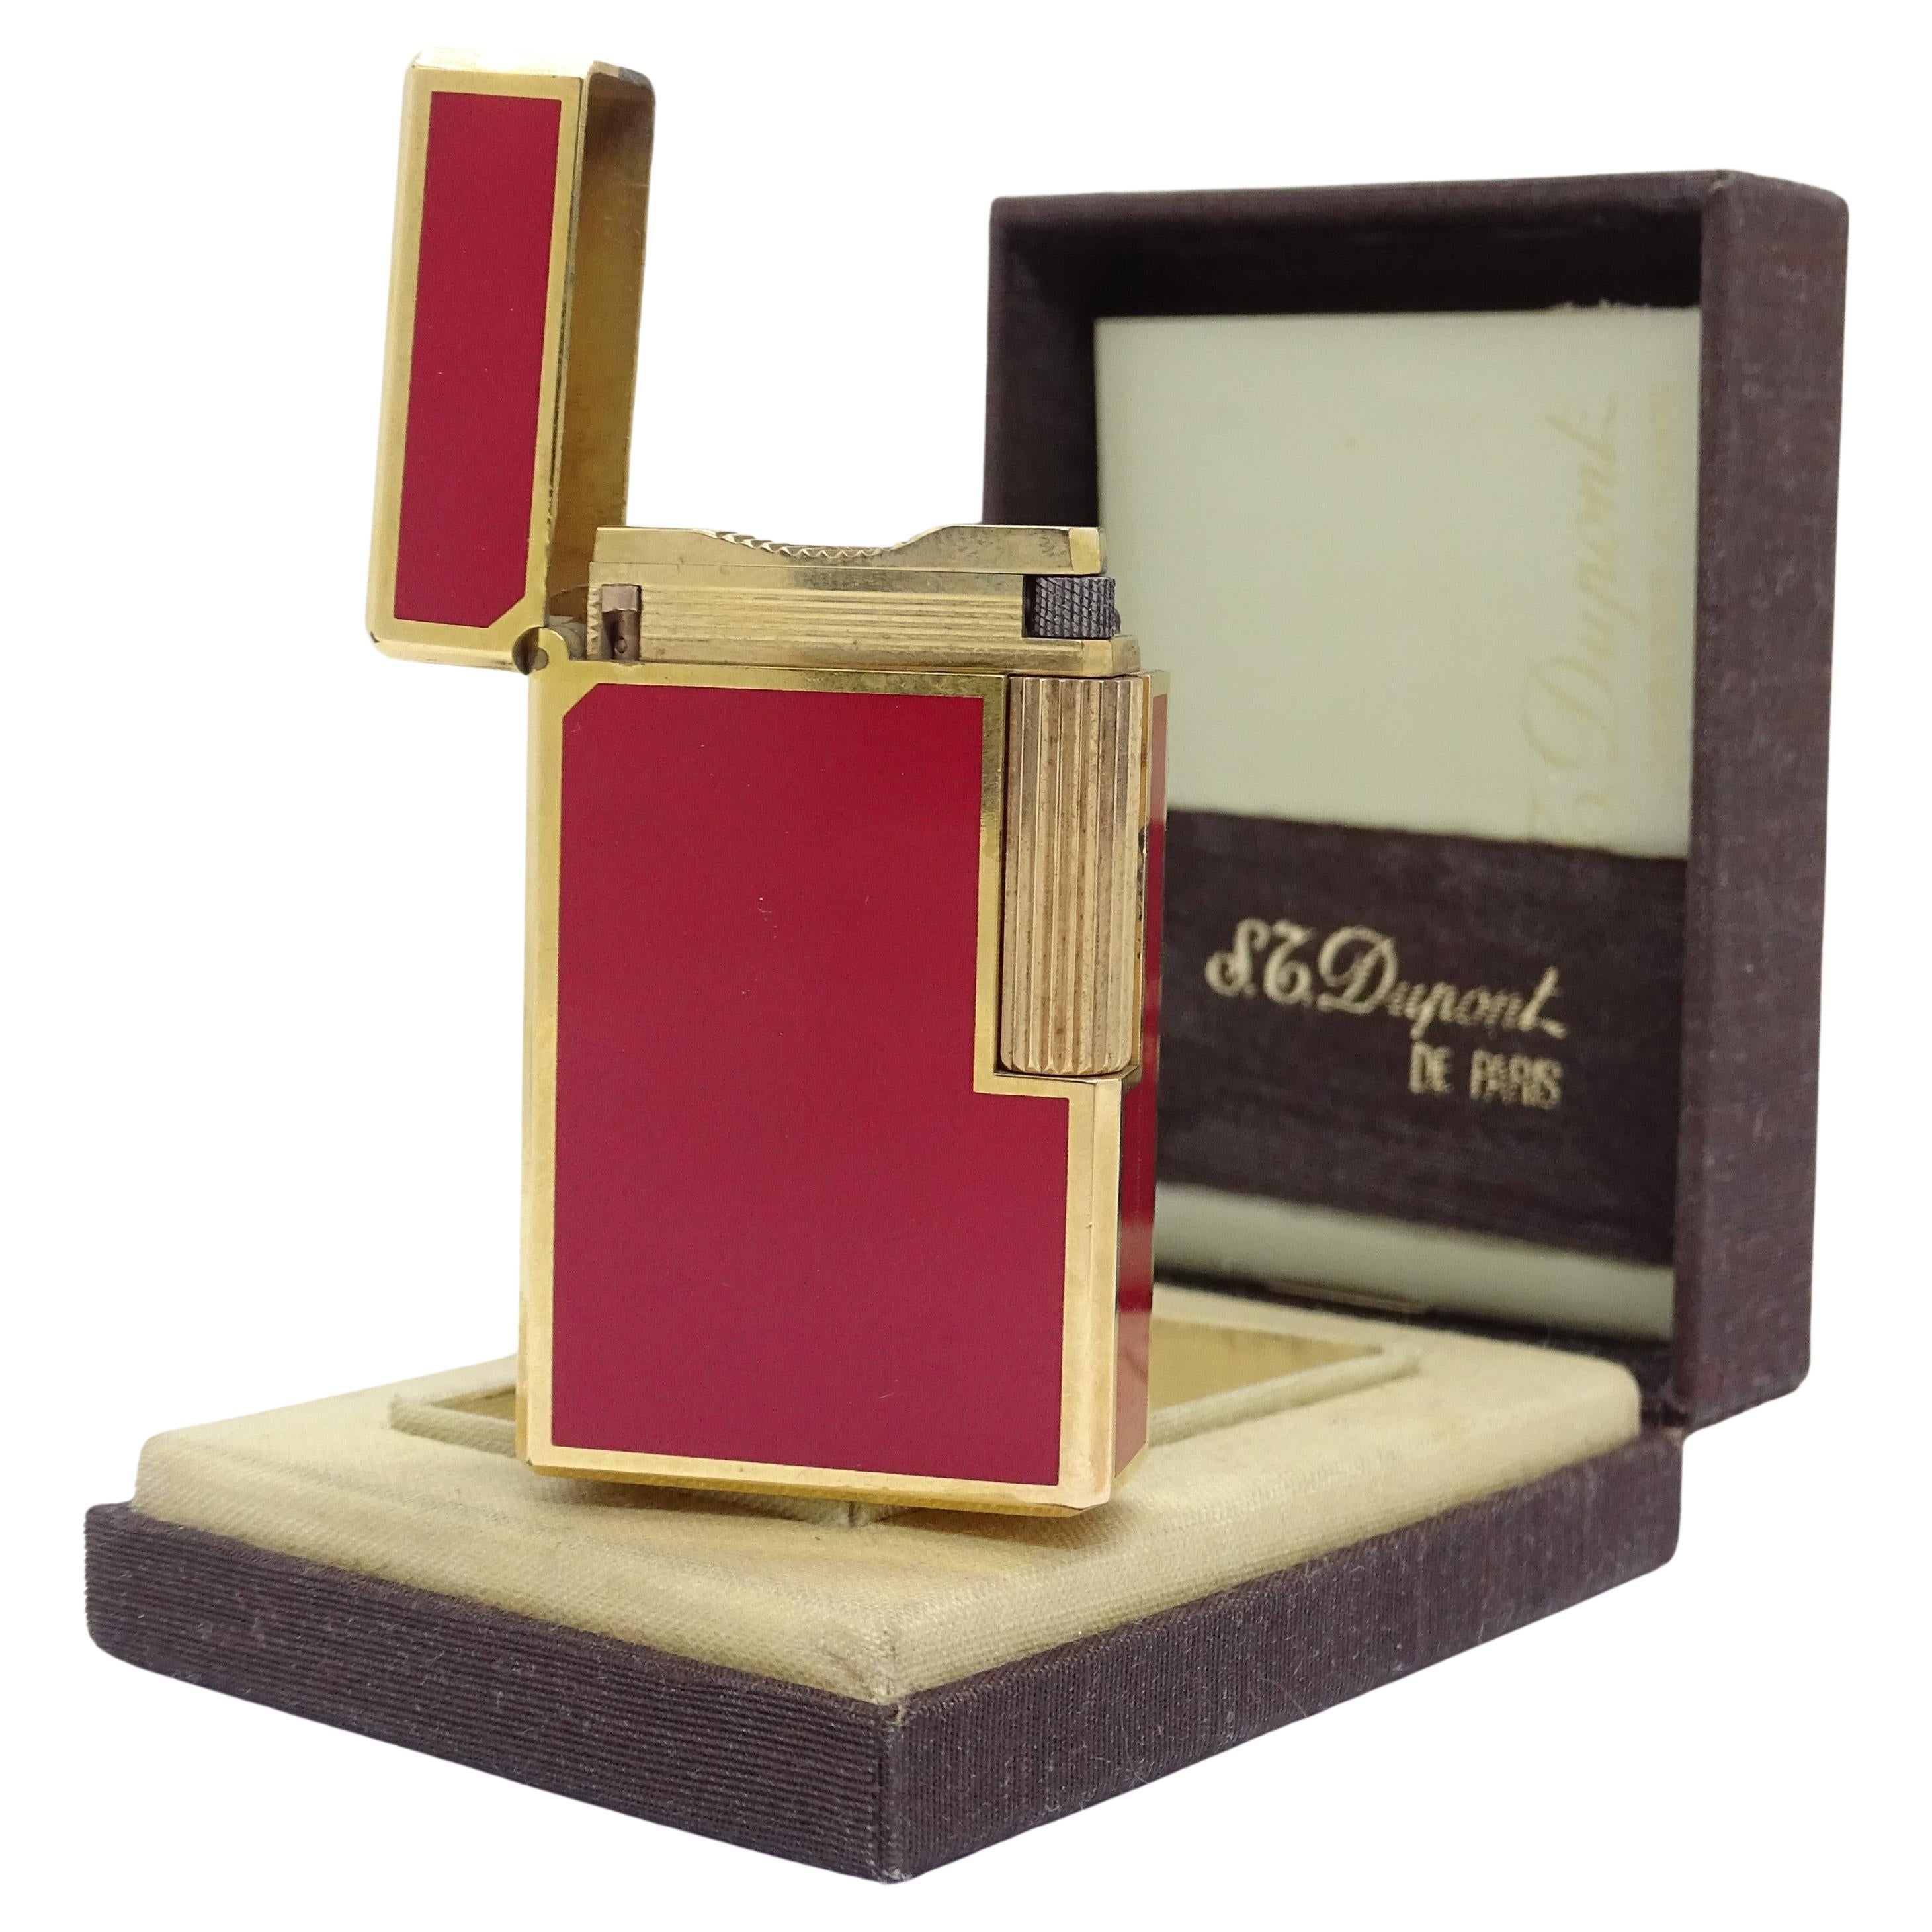 S.T.Dupont red lacquer and plated gold lighter collection